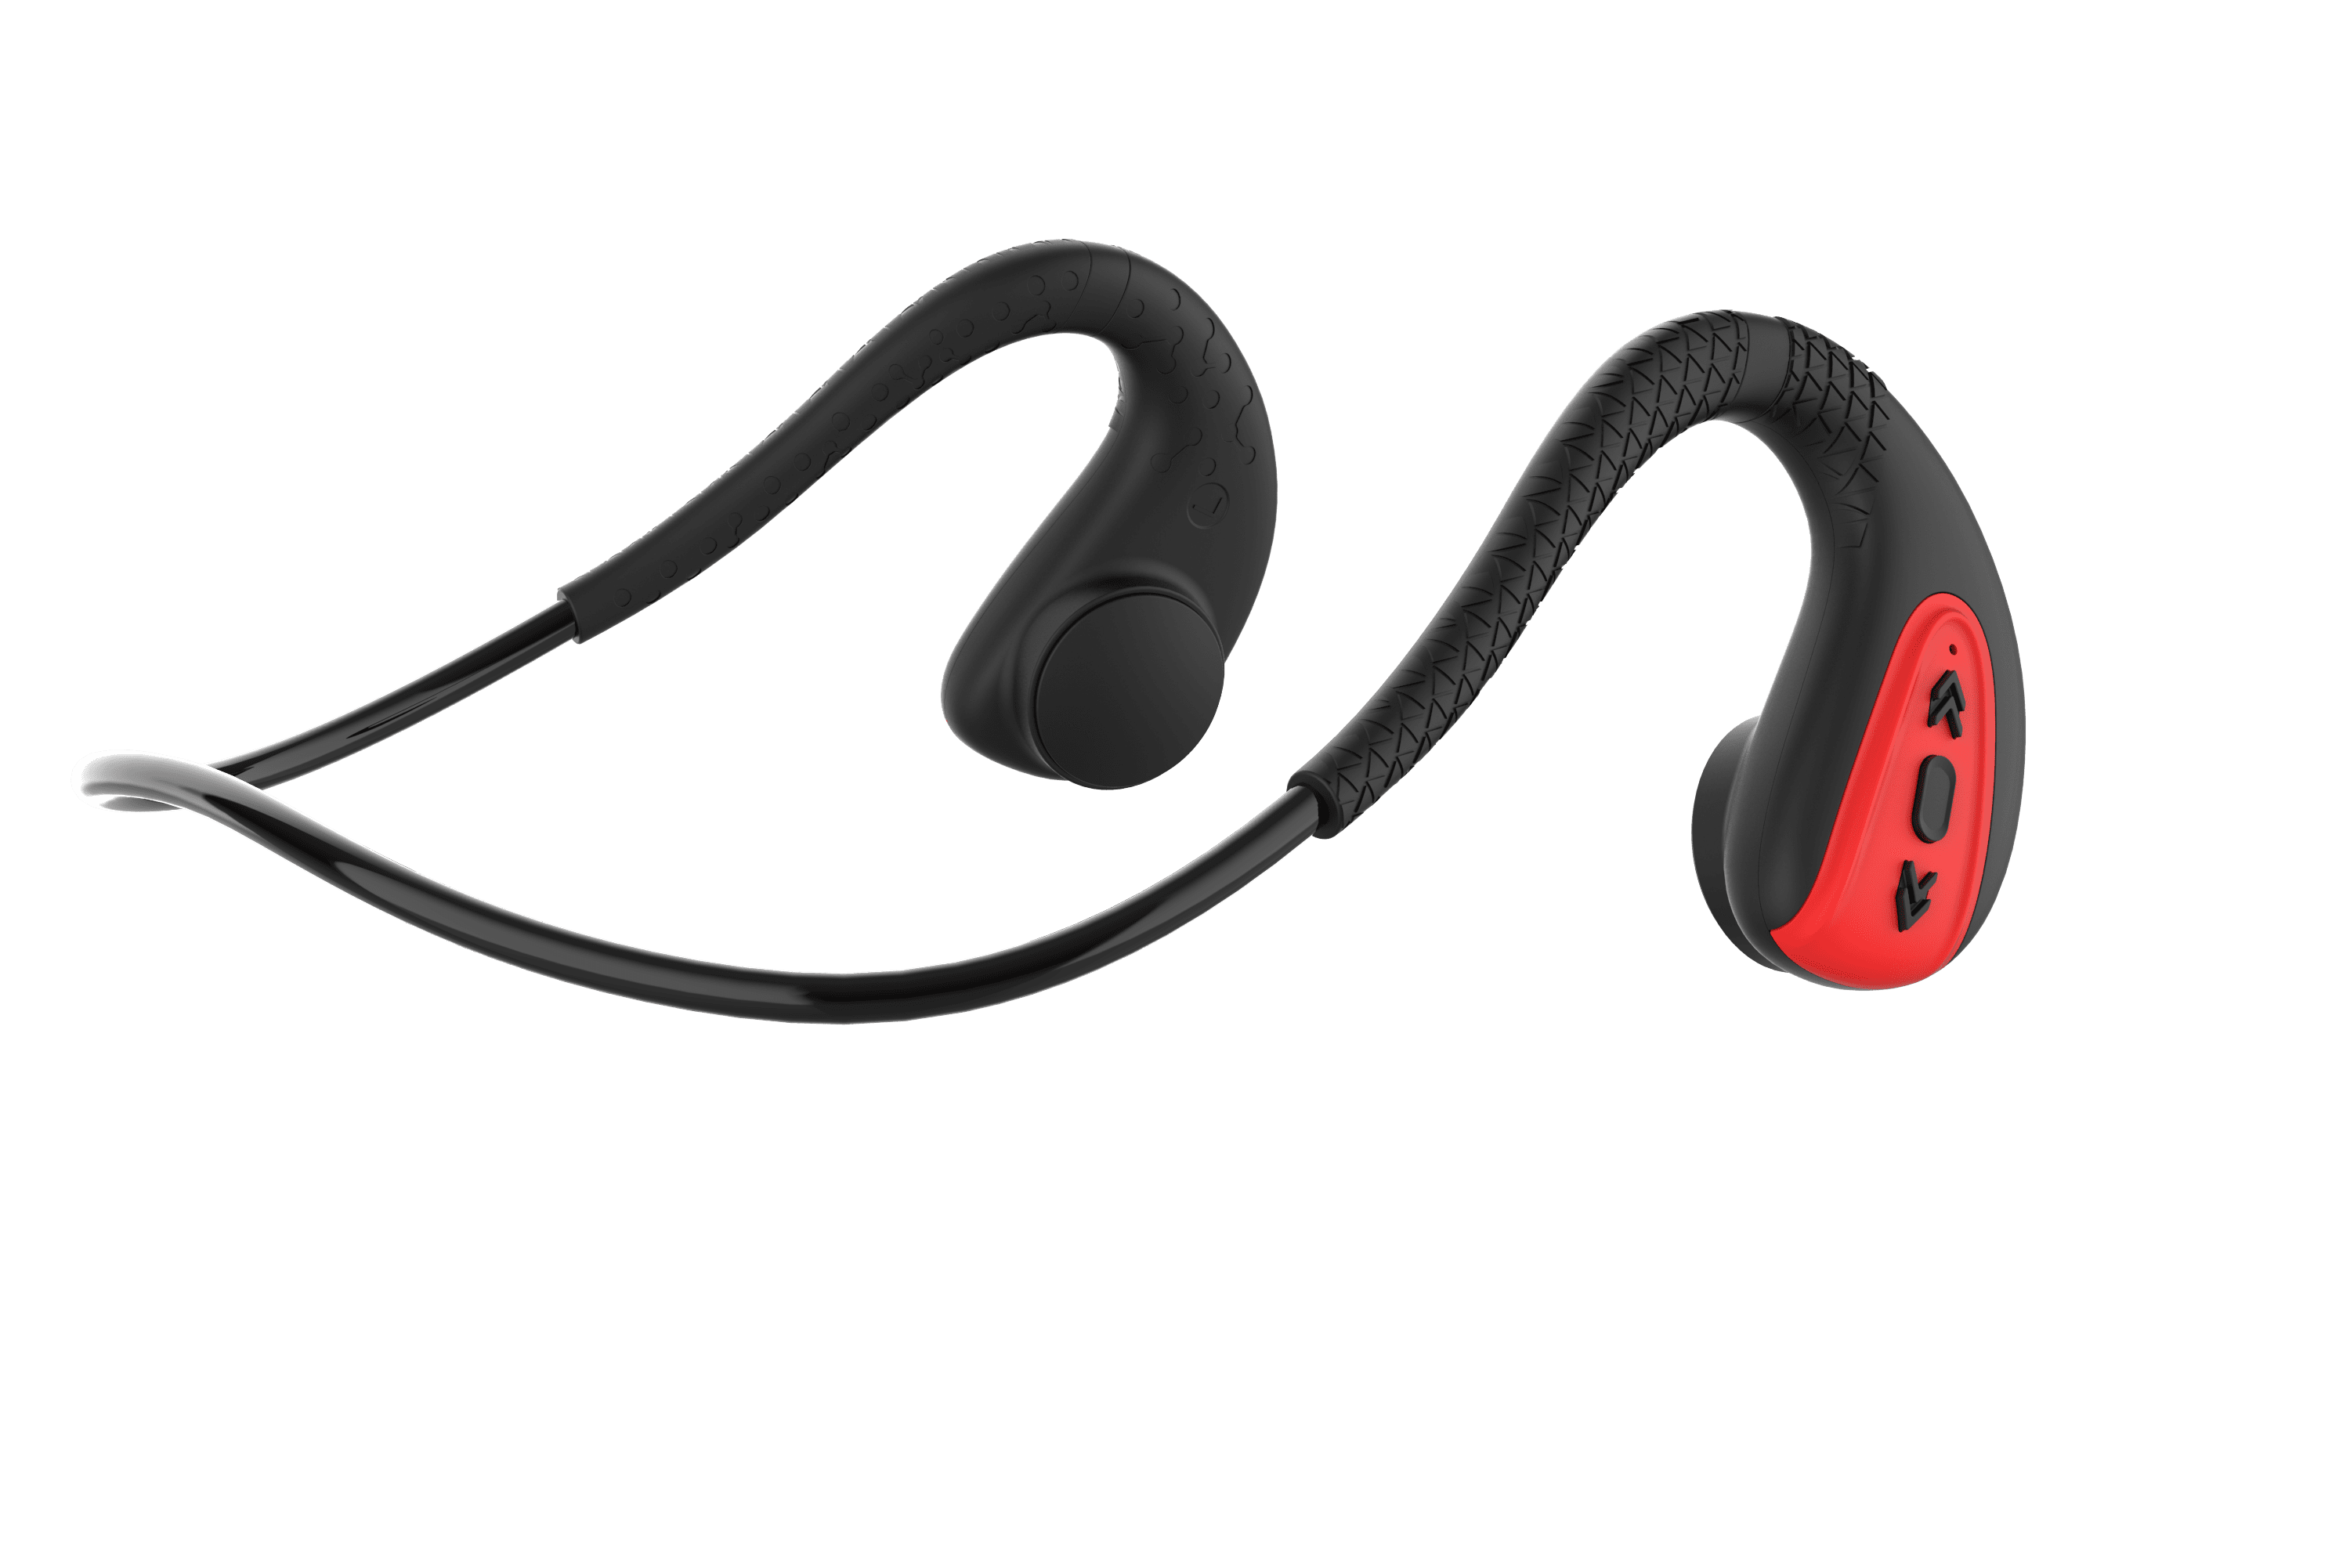 Cost-effective and Most worthwhile Xgody Q1 Neckband Water Proof Bone conduction headphones for 2020 - XGODY 